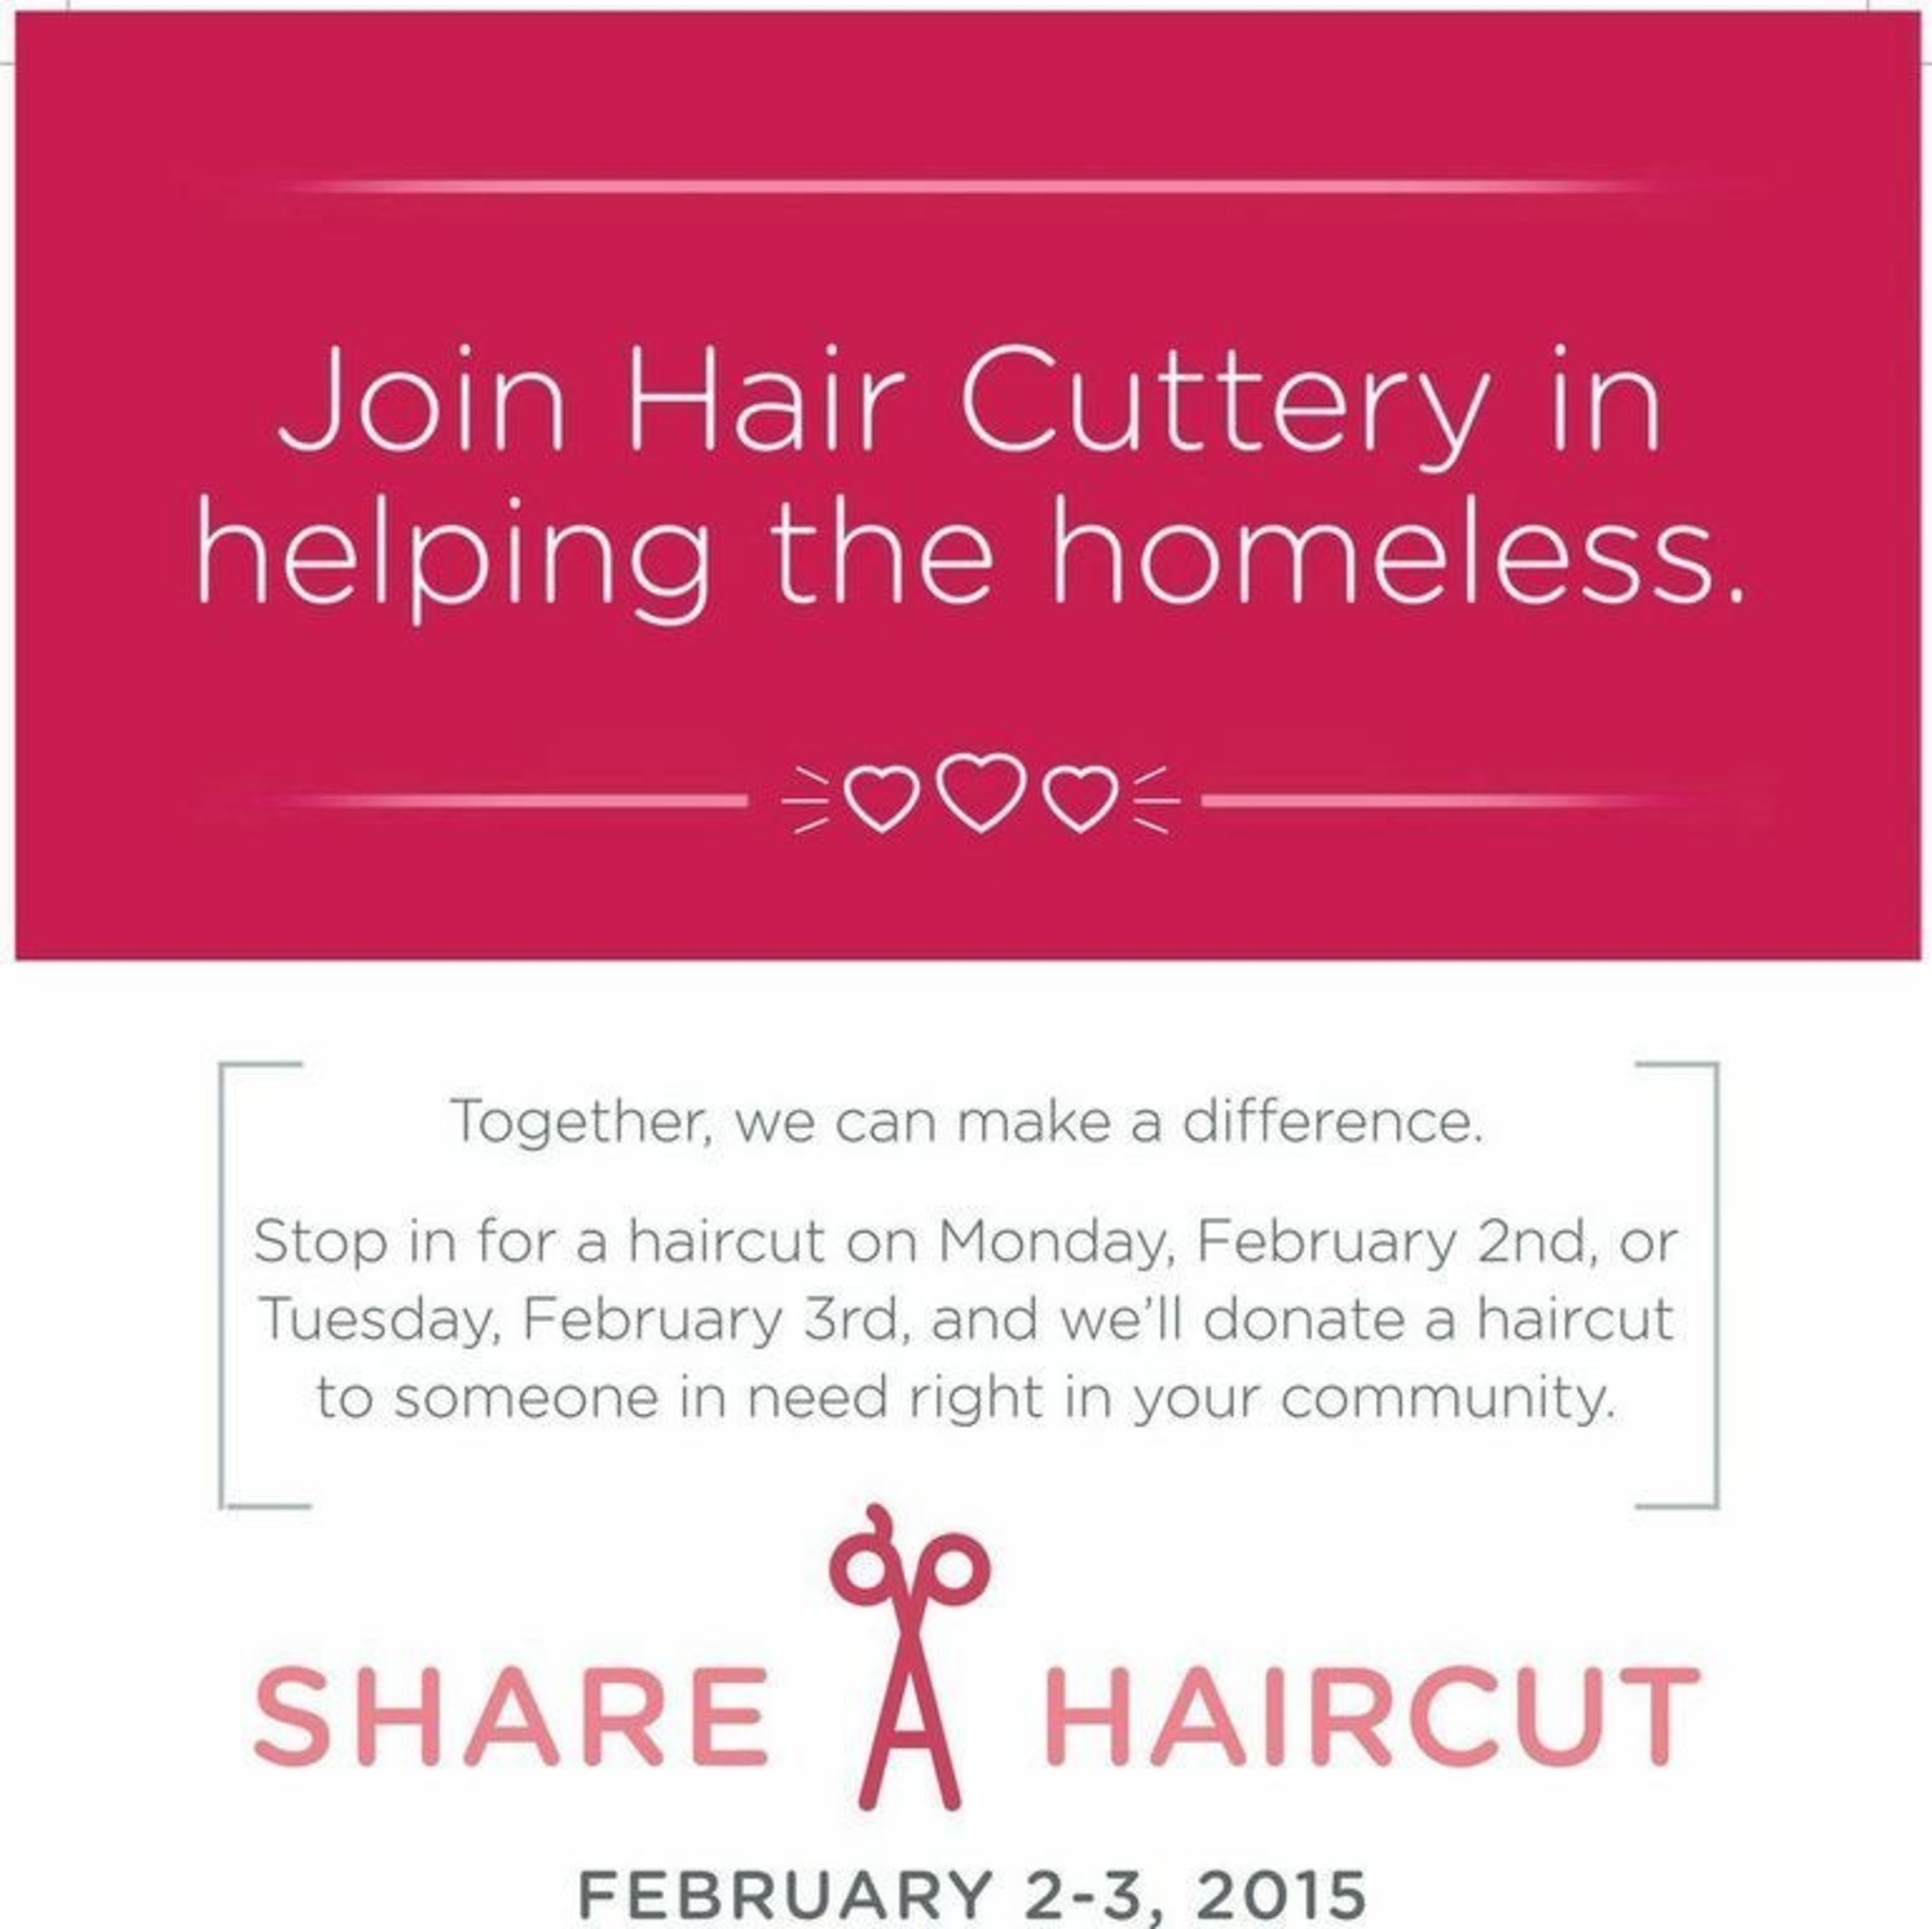 For every haircut purchased on on Monday and Tuesday, Feb. 2-3, a free haircut certificate will be donated back to a homeless person local to one of Hair Cuttery's 900 salons.